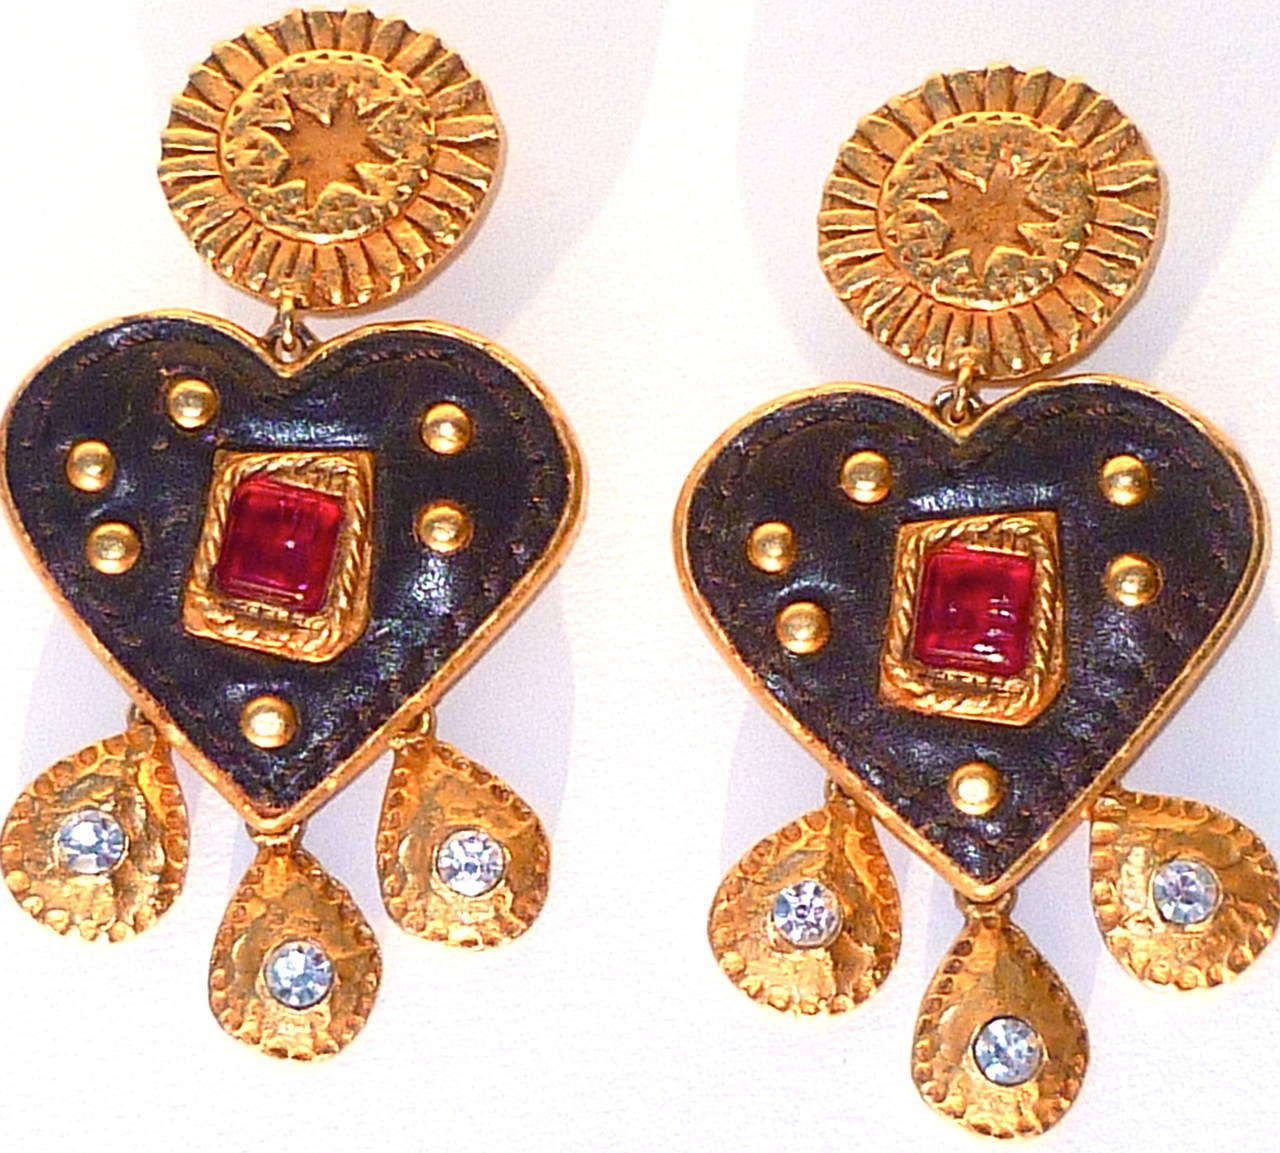 From the Winter 1990 Christian Lacroix Collection, these large dangling ear clips are made in three articulated sections - the ear clip as a large gilt sun (or sunflower), hung with a brown leather heart  with a red poured glass center framed in